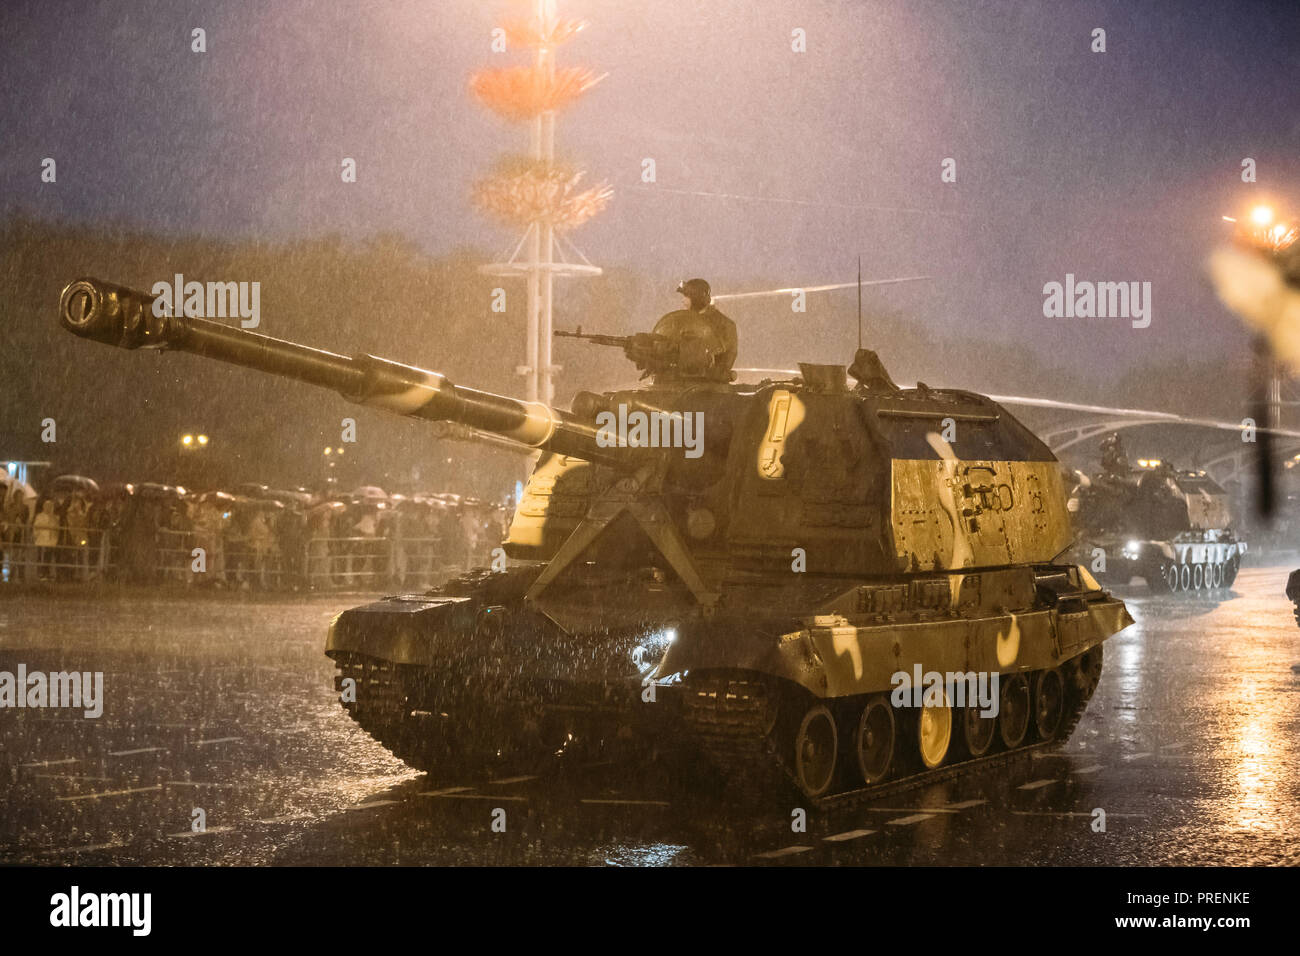 Minsk, Belarus. Military Self-propelled Guns Moving At Street During Rehearsal Before Celebration Of Independence Day Of Belarus. Evening Rainy Time. Stock Photo